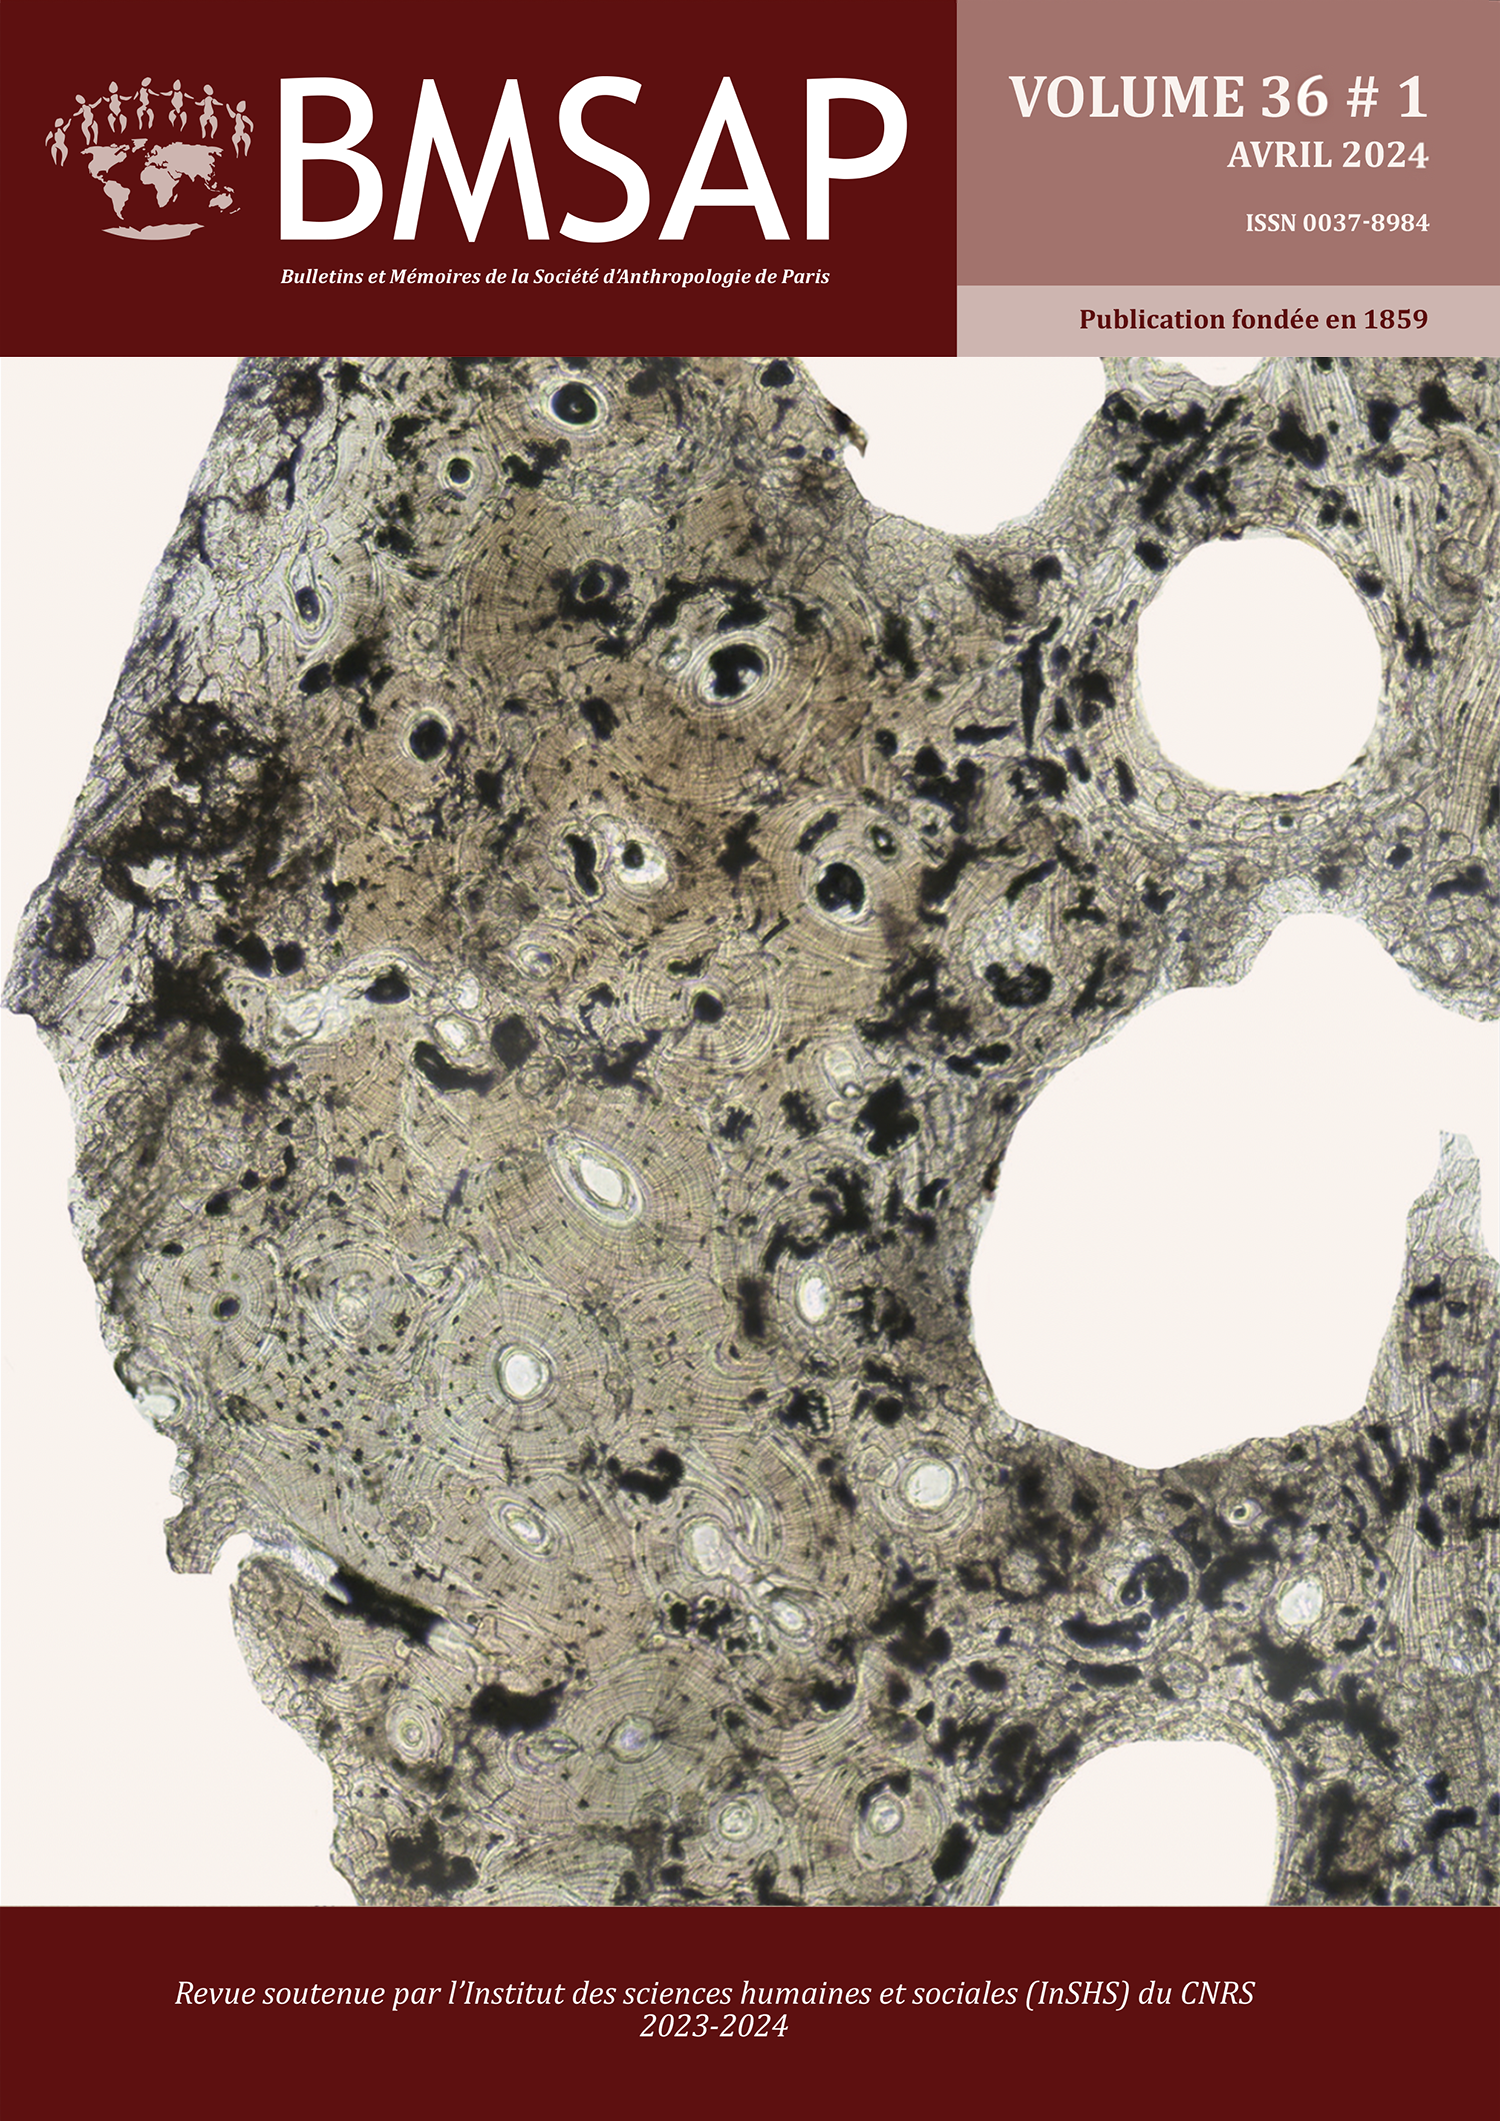 Cover of BMSAP volume 36, published in April 2024. The illustration chosen is a thin section observed under the light microscope of a human rib from the Sainte-Anne cemetery, Koekelberg, Belgium (Trenchat et al.).